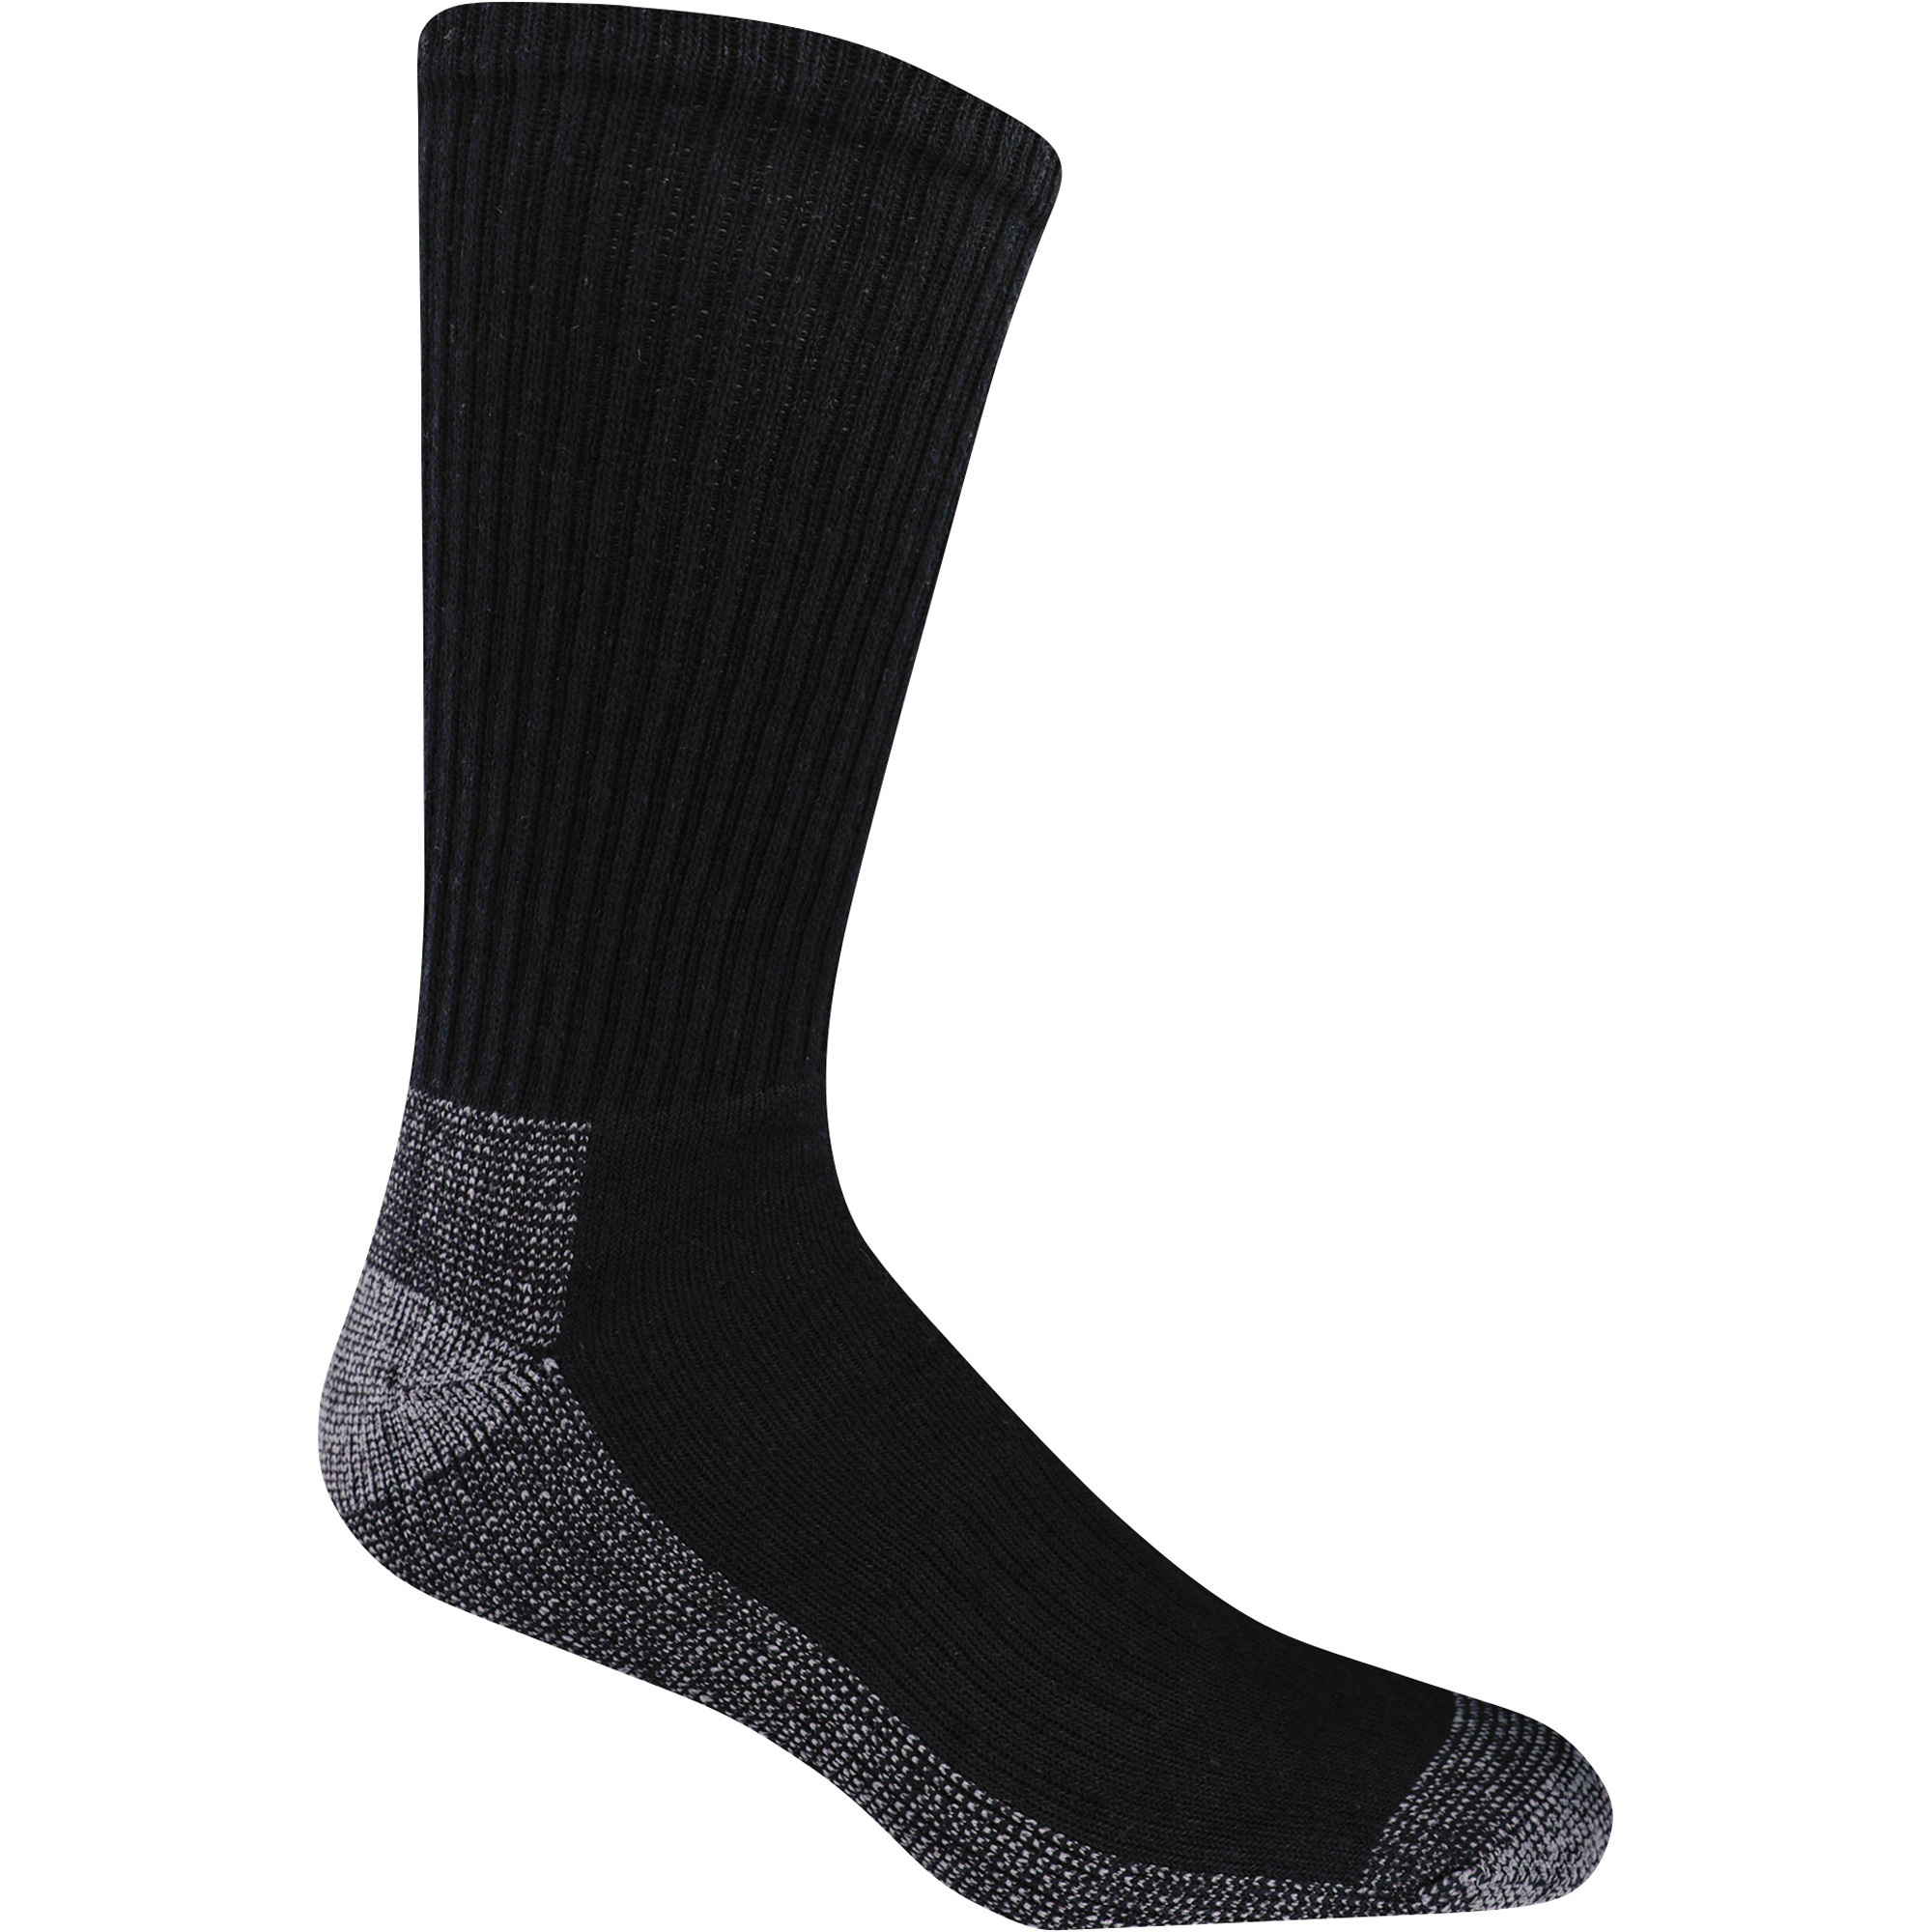 Fruit of the Loom Work Gear Poly/Cotton Crew Socks, 6 Pairs, Black, Large, Model FRM10124C6C2001 Black